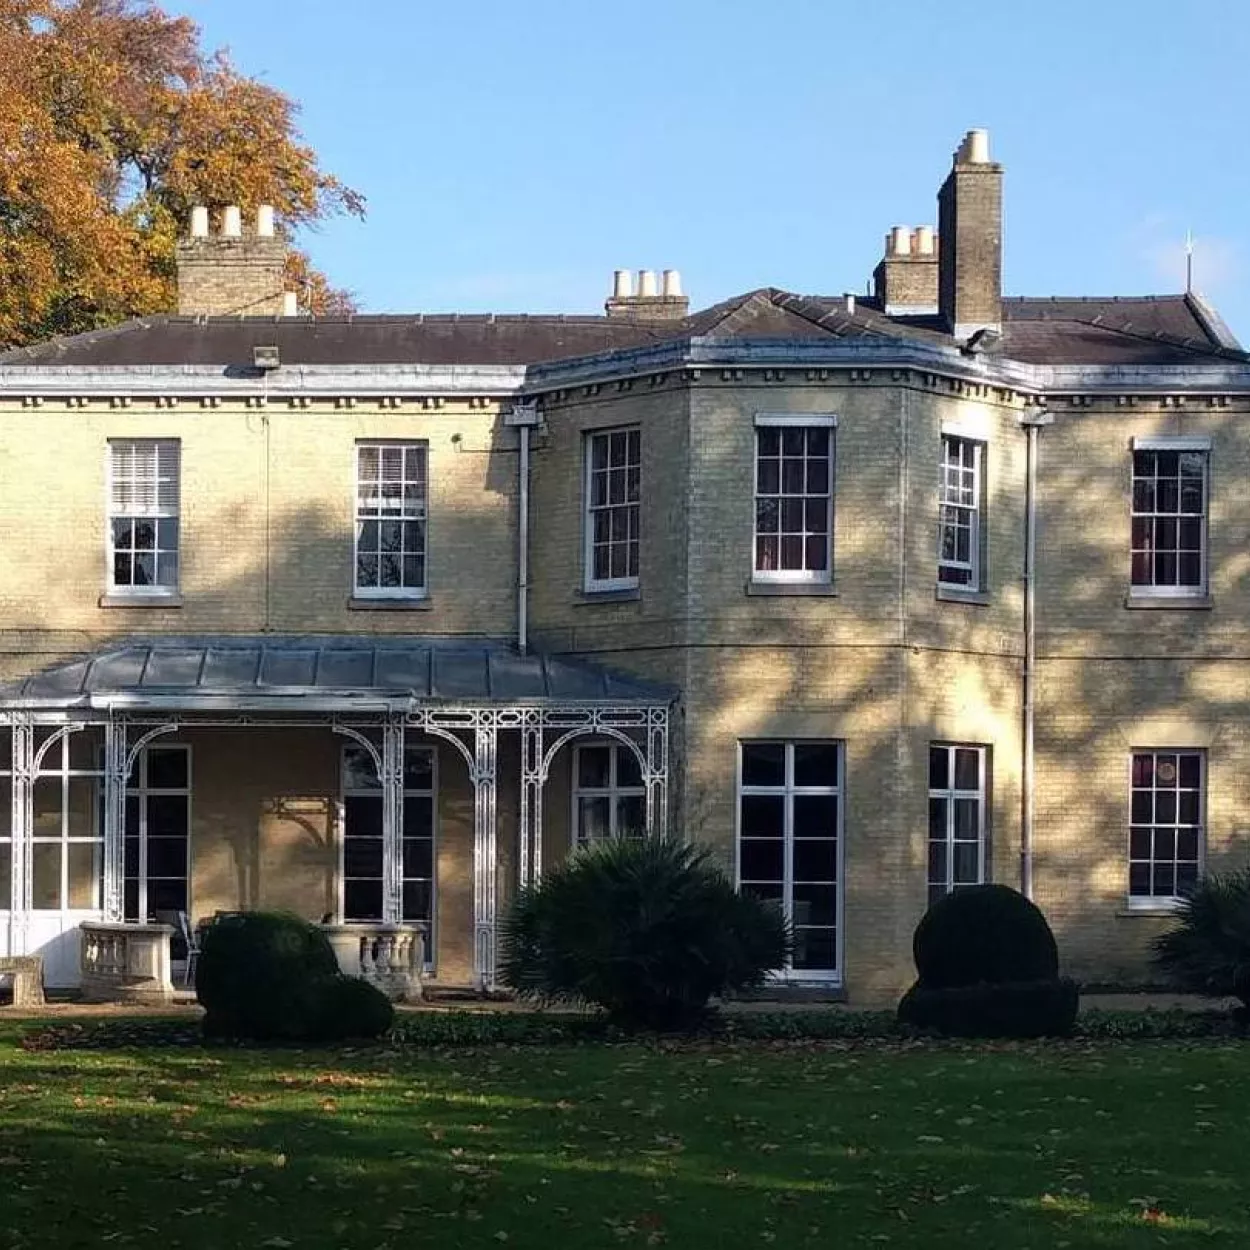 The Grove is a regency era house in the centre of the main site of Fitzwilliam College.